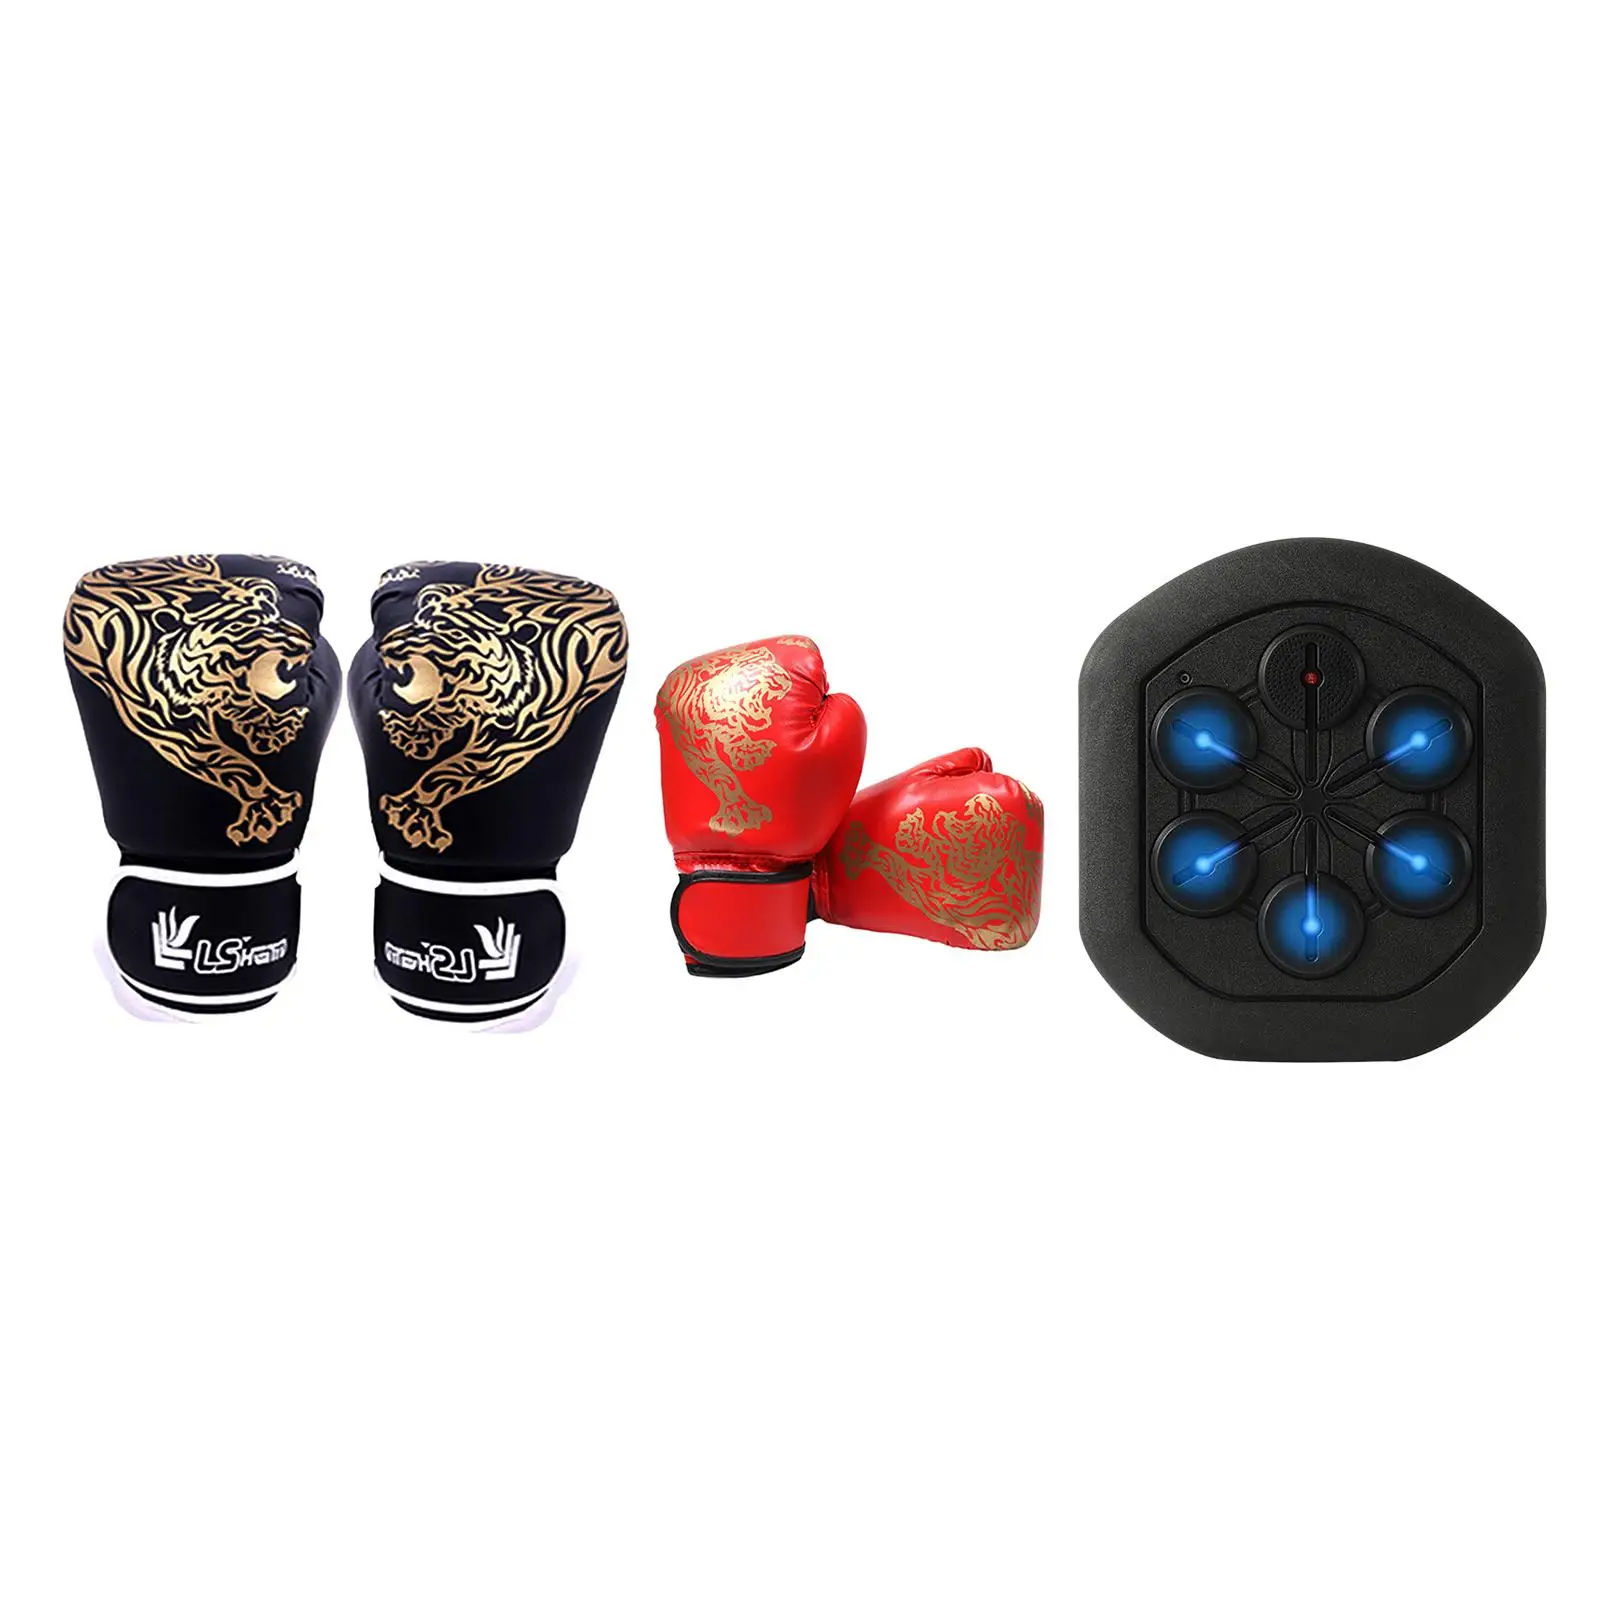 Music Boxing Wall Target Reaction Target Machine for Kids Adults